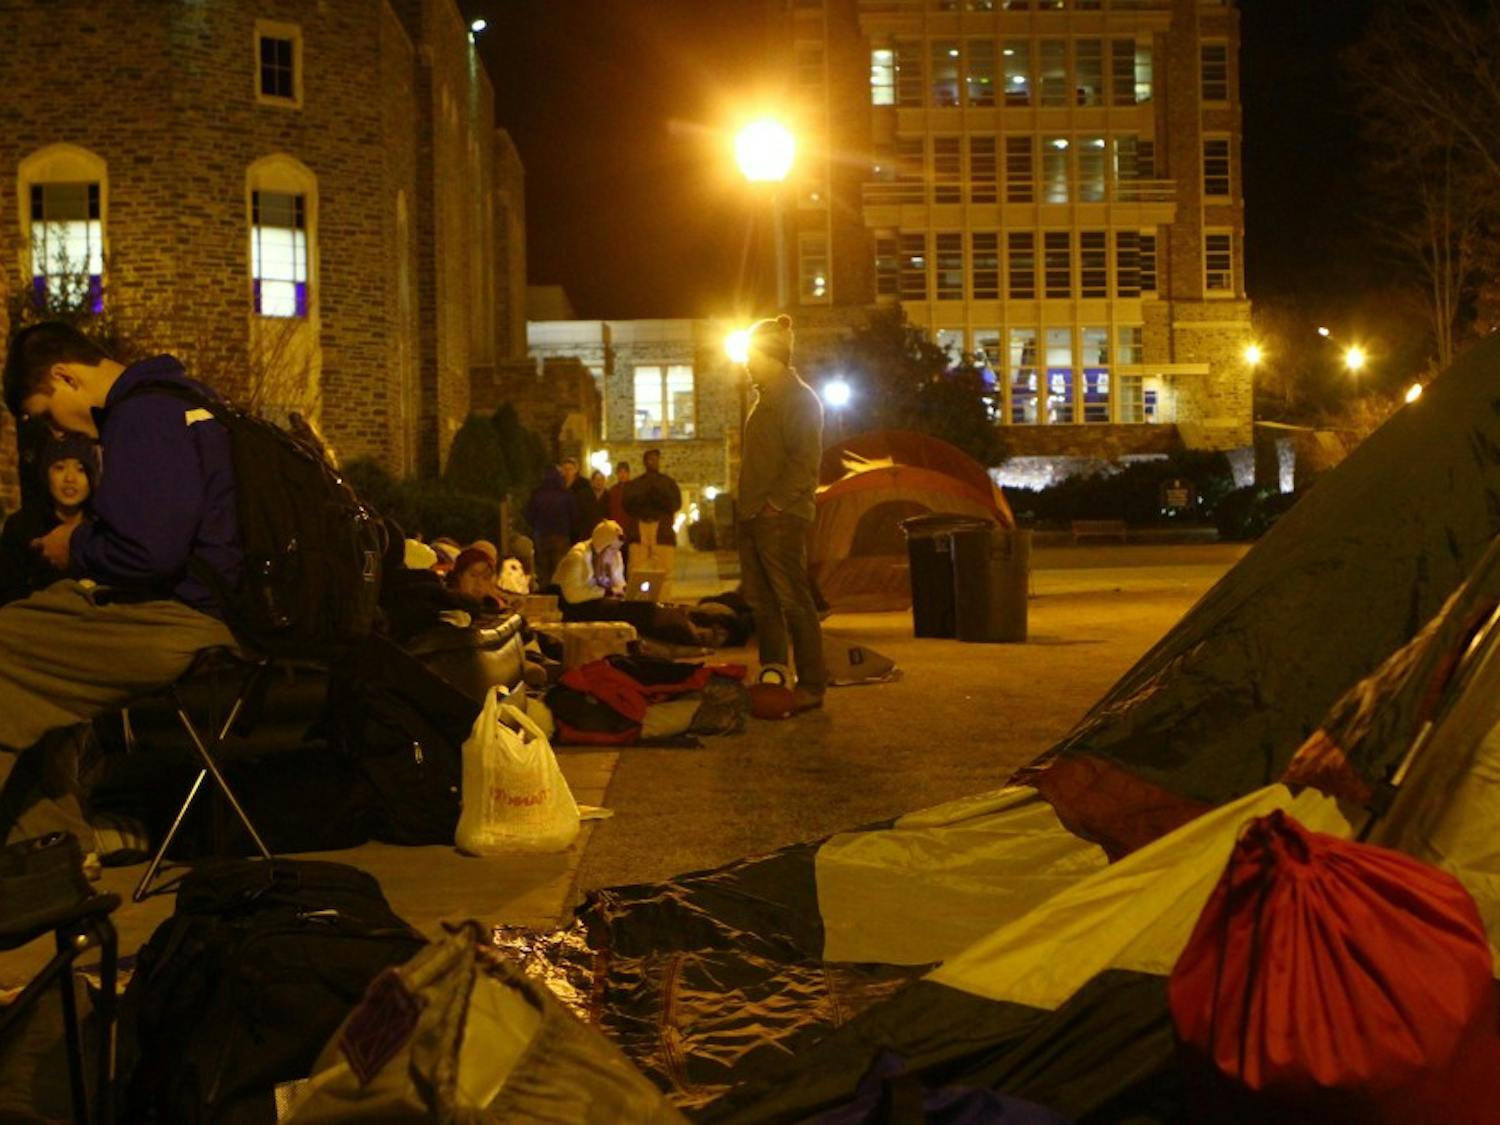 The Cameron Crazies were allowed to use tents as they waited out for the Ohio State game.